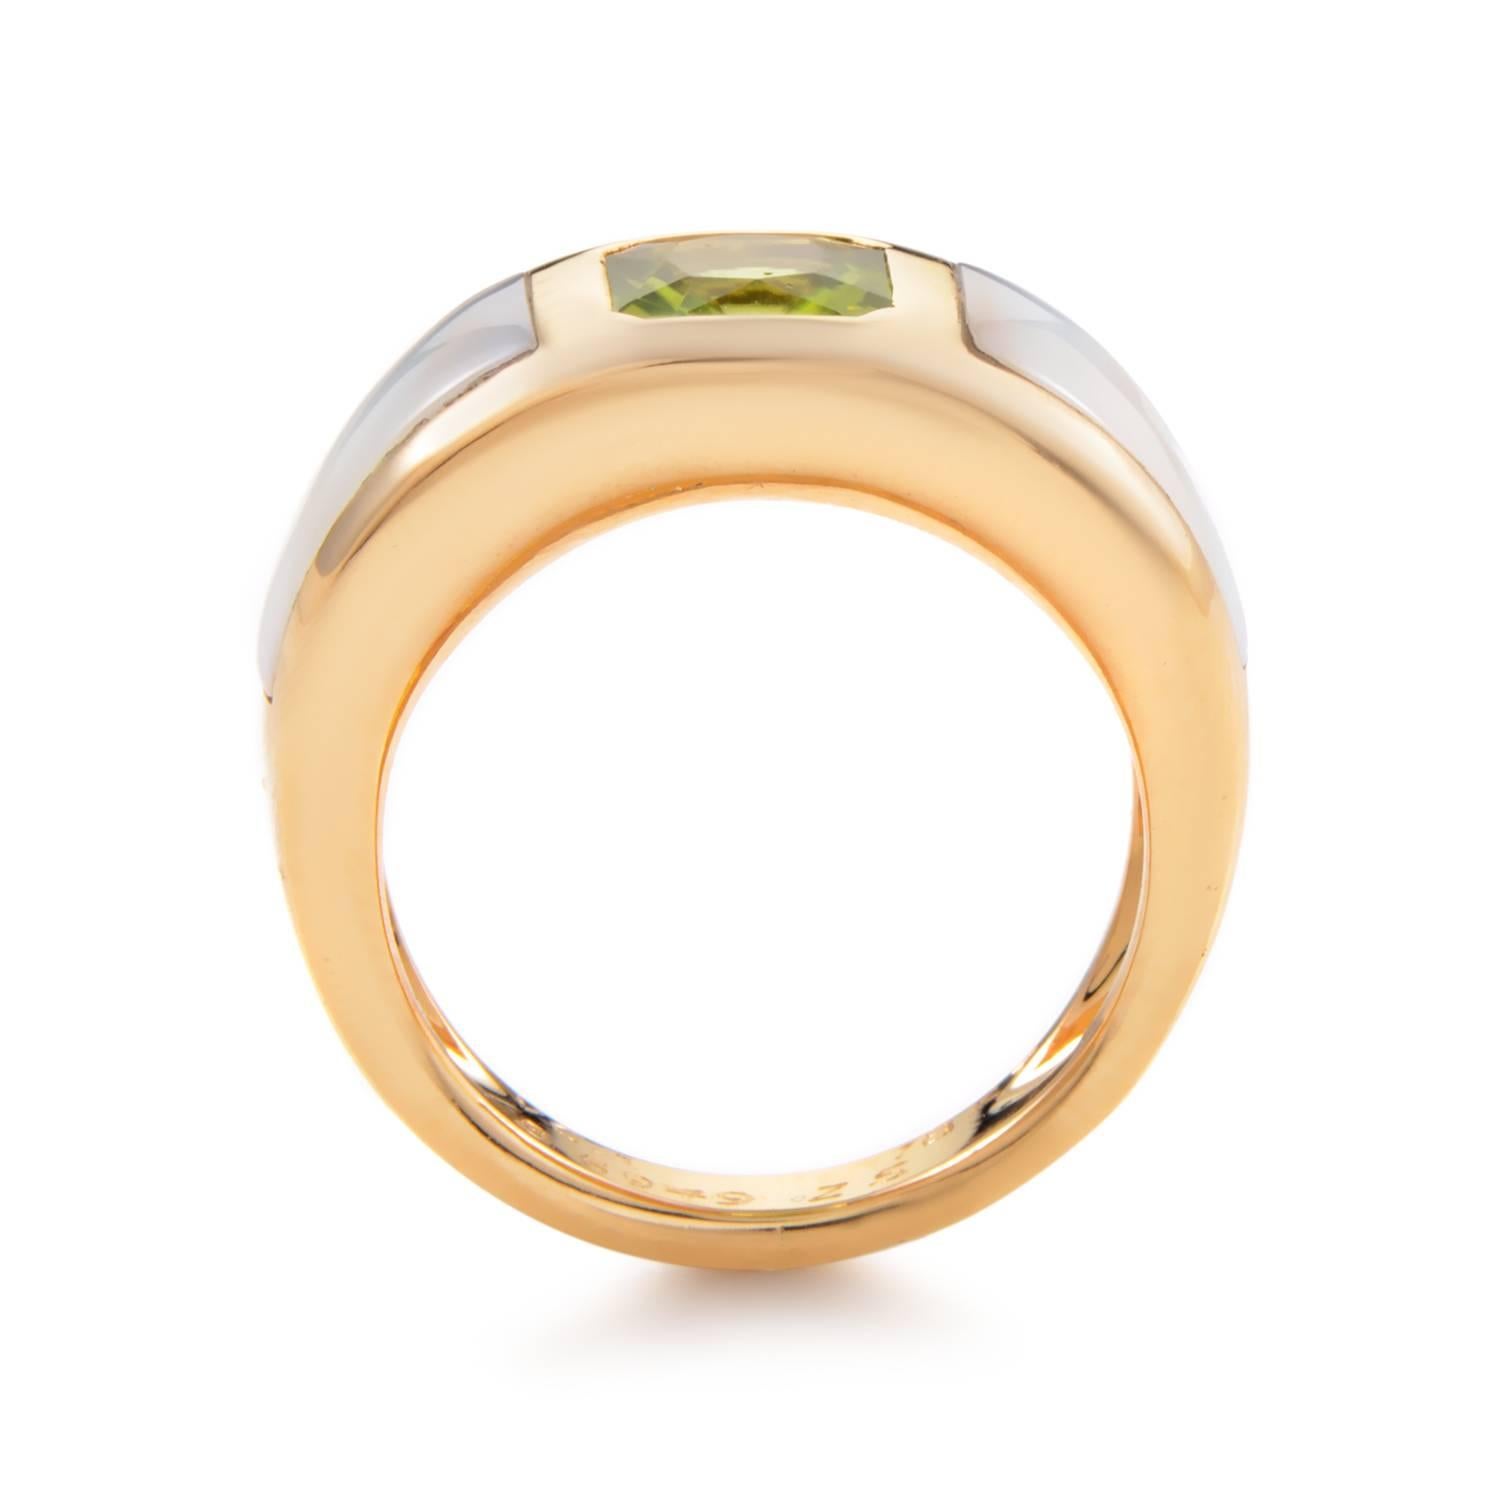 Feast your eyes upon the eye-catching design of this band-style ring from Van Cleef & Arpels! The ring is made of 18K yellow gold and is inlaid with mother of pearl and a single peridot stone.
Ring Size: 6.25 (52 1/8)
Band Thickness: 9mm